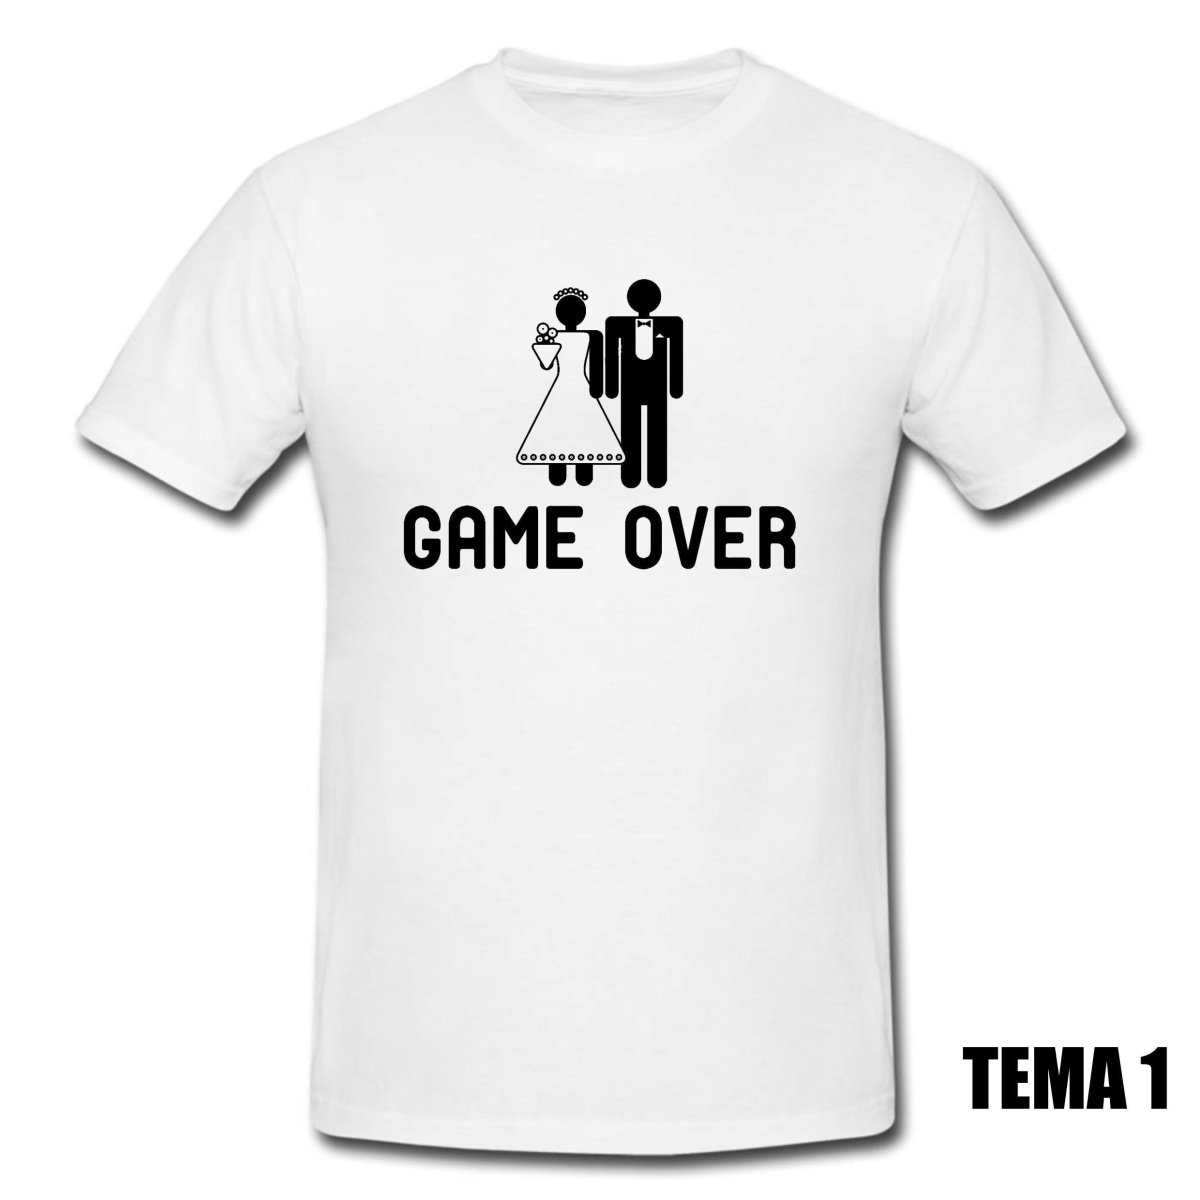 Tshirts - GAME OVER - RMCLICK